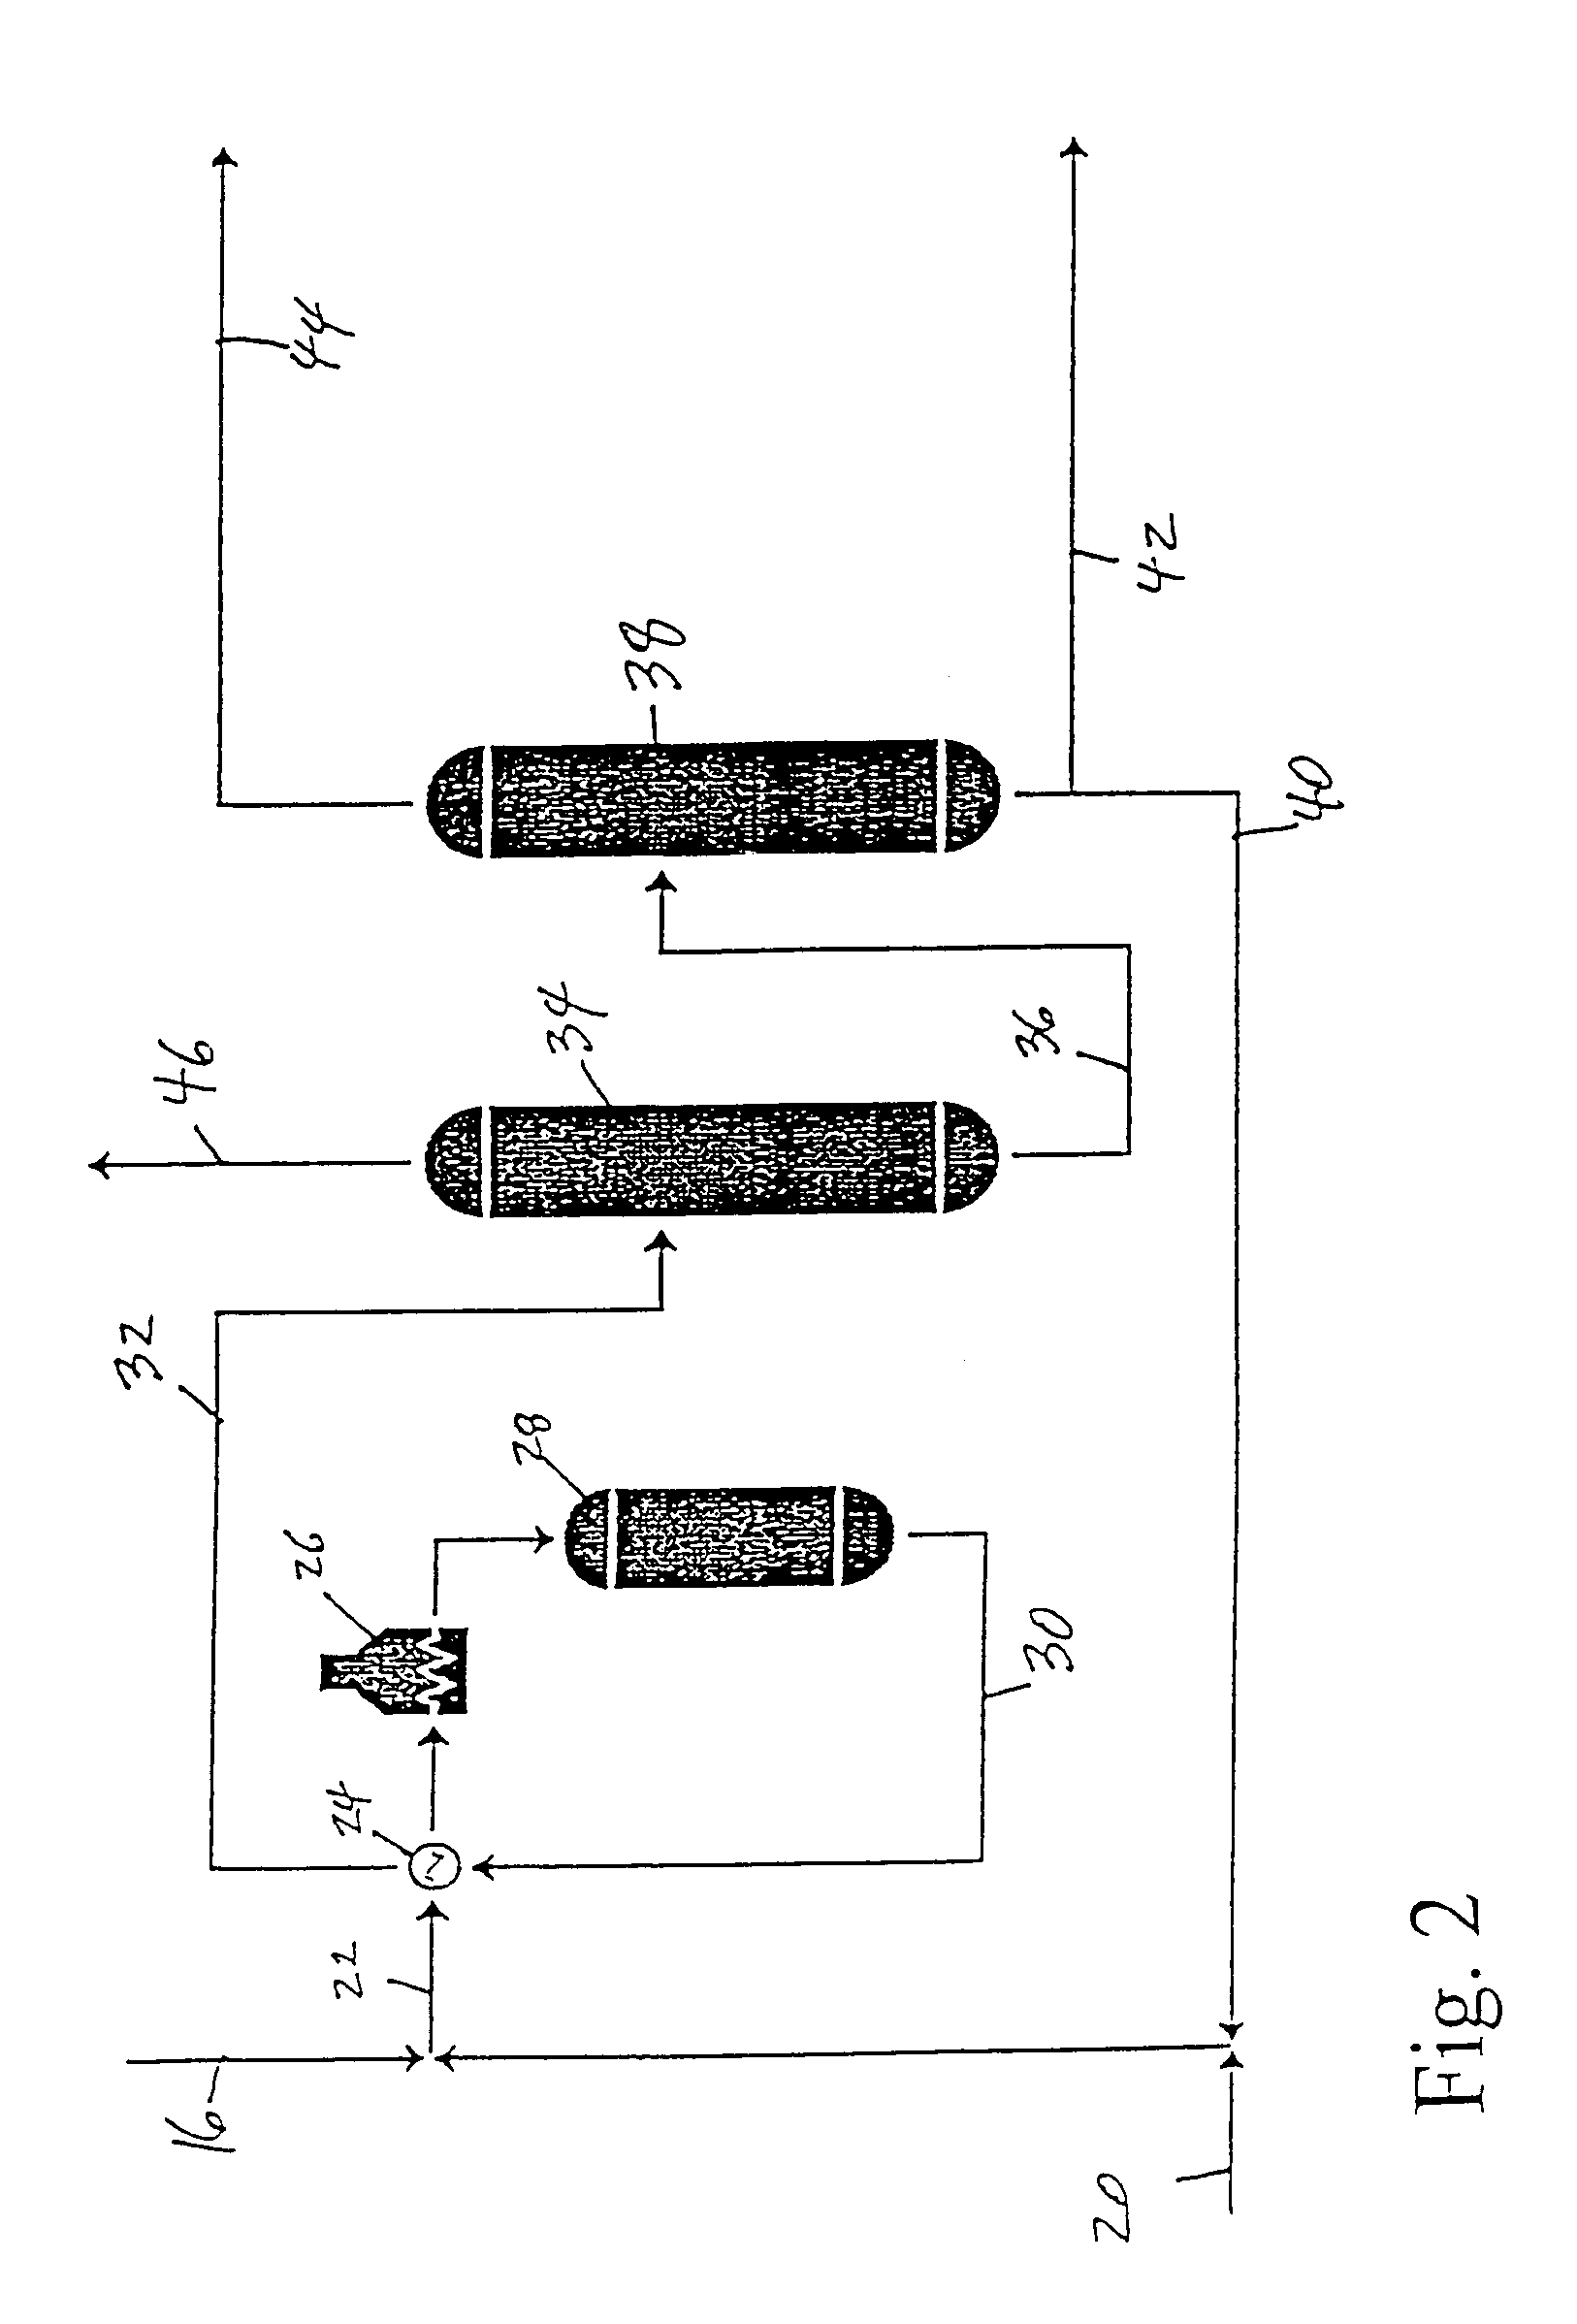 Process for production of propylene and ethylbenzene from dilute ethylene streams